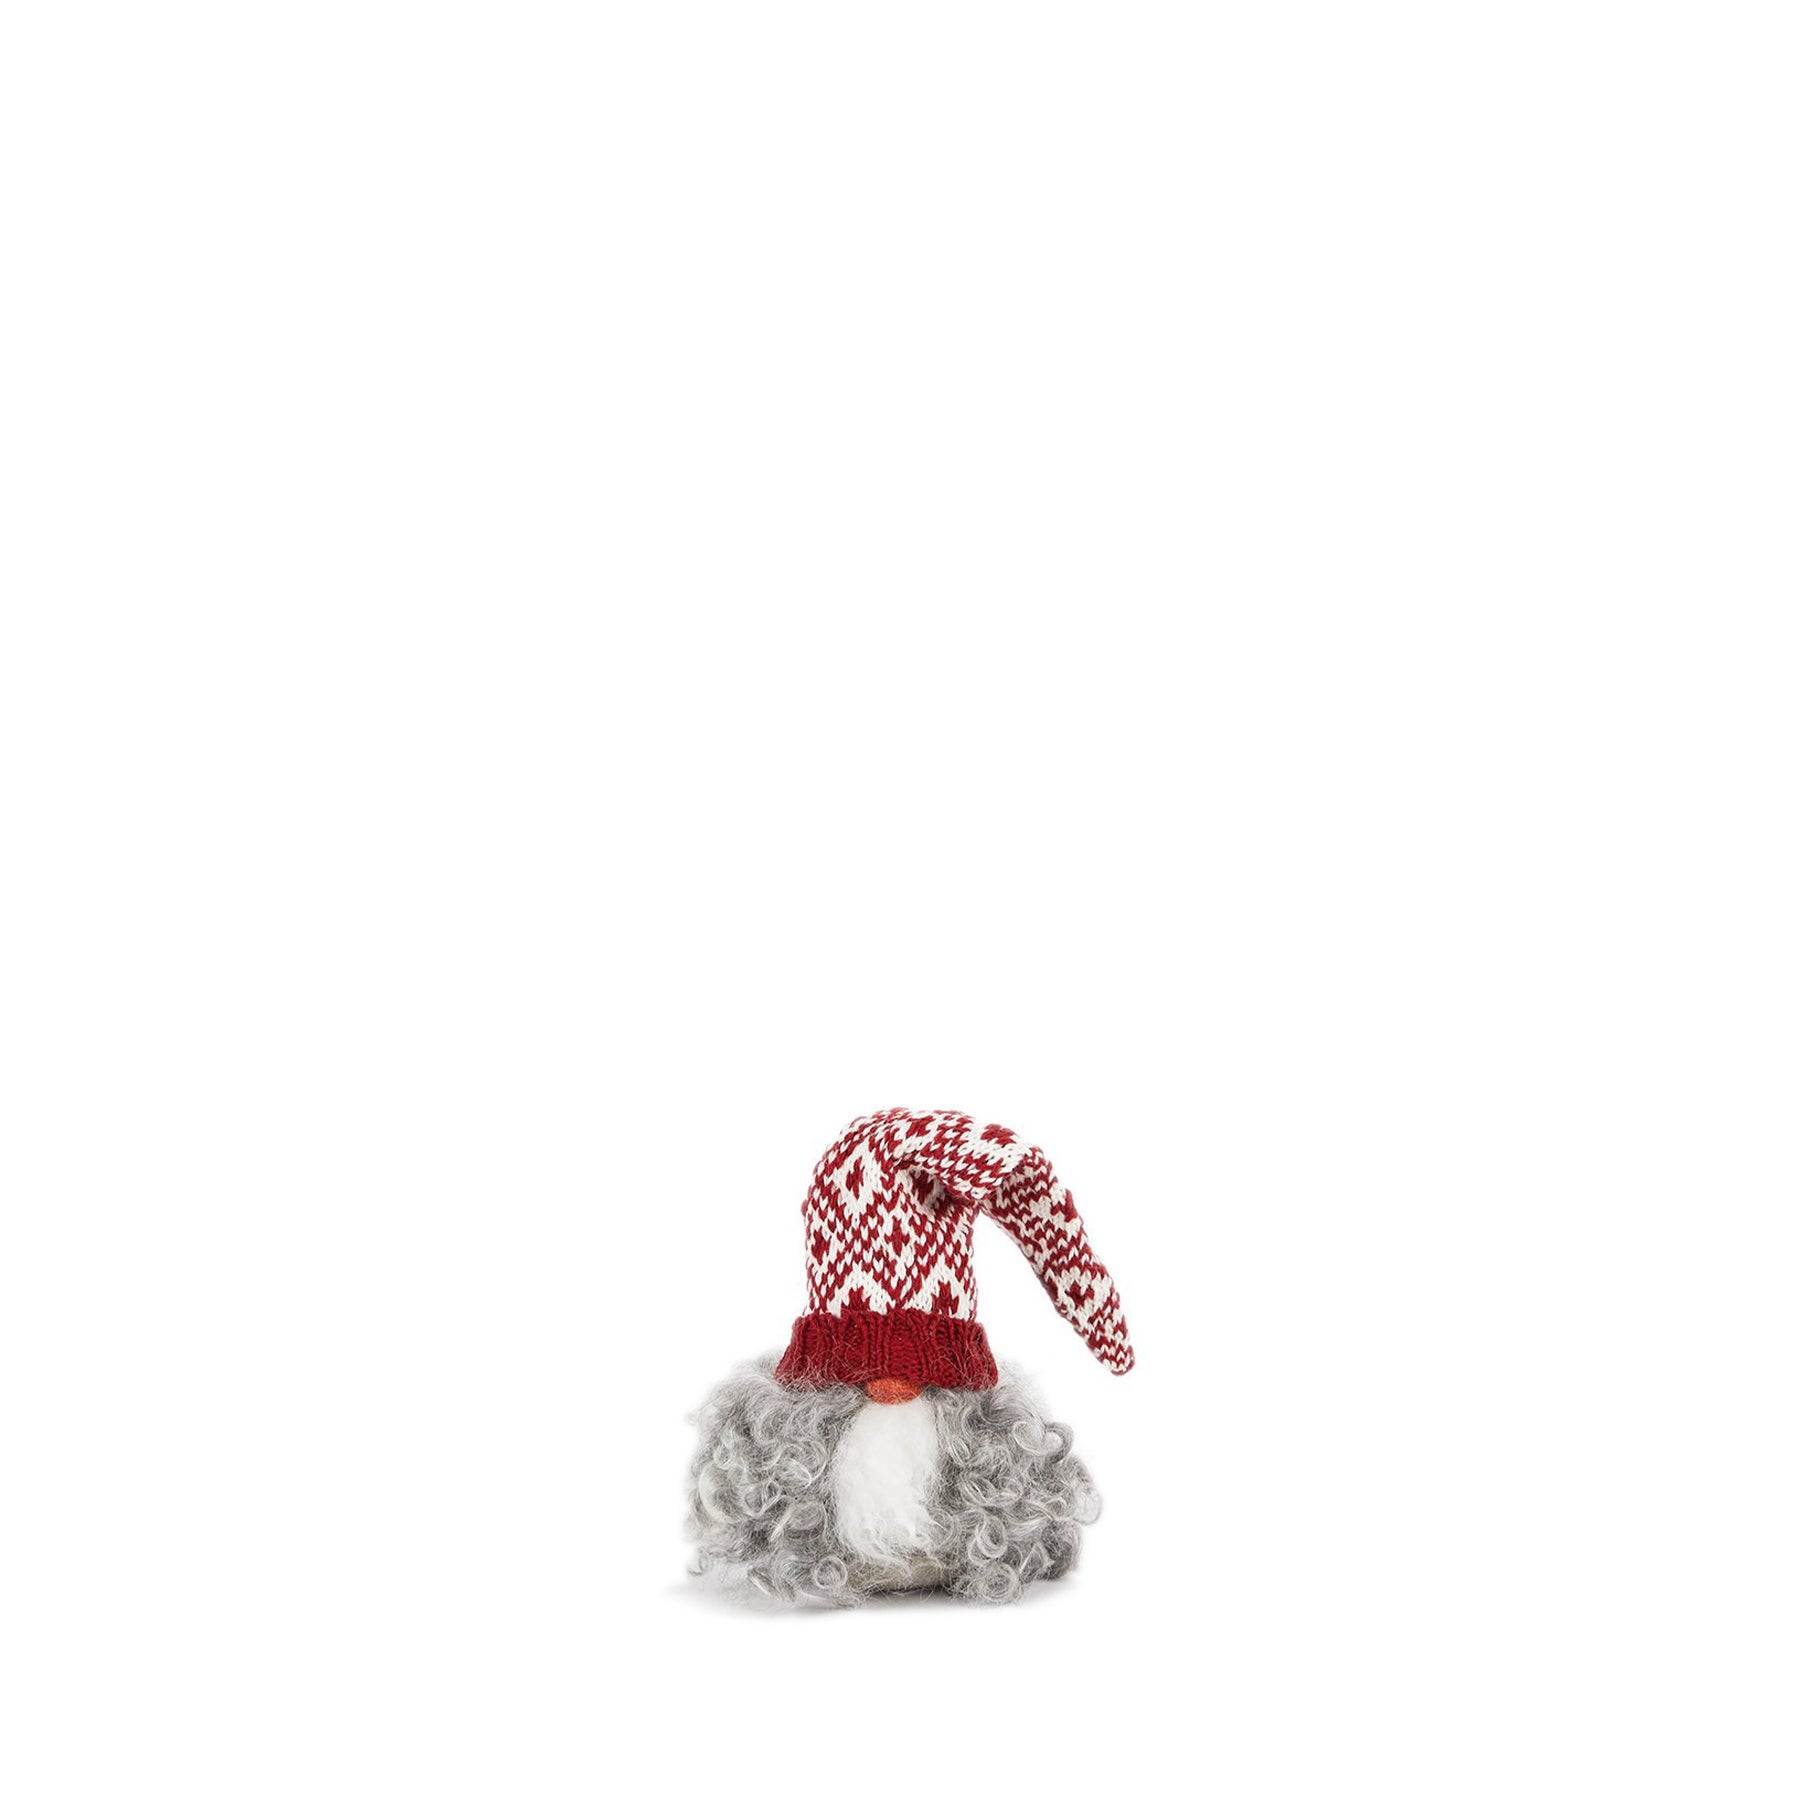 Viktor with Red & White Knitted Cap Zoom Image 1